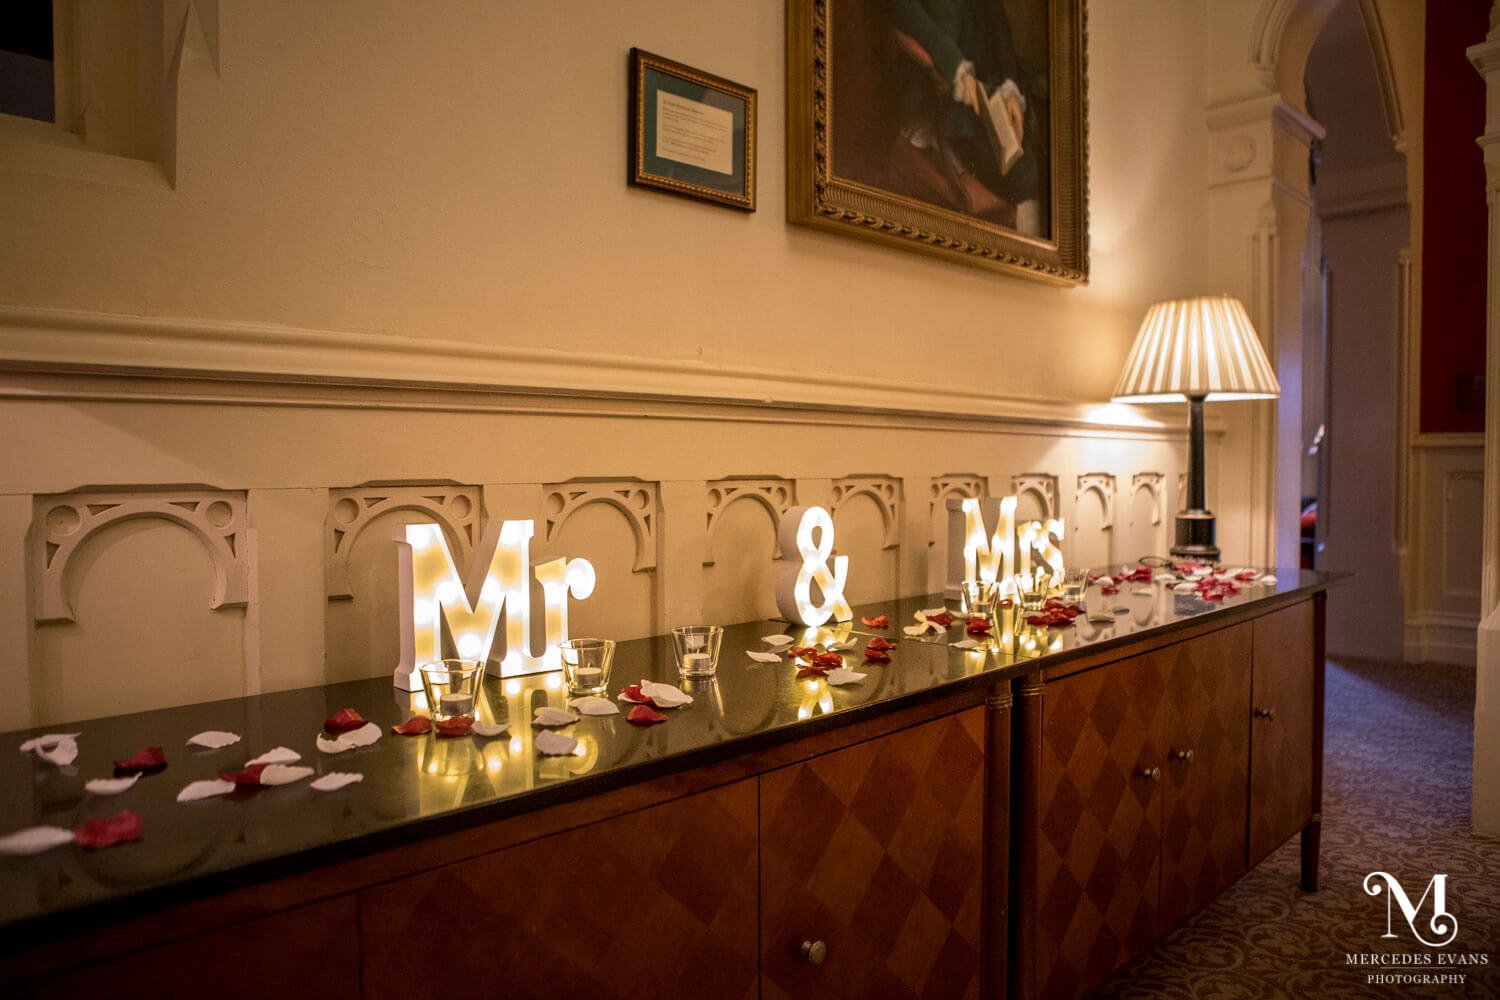 Mr & Mrs lit up letters along with rose petals on a cabinet at the wedding